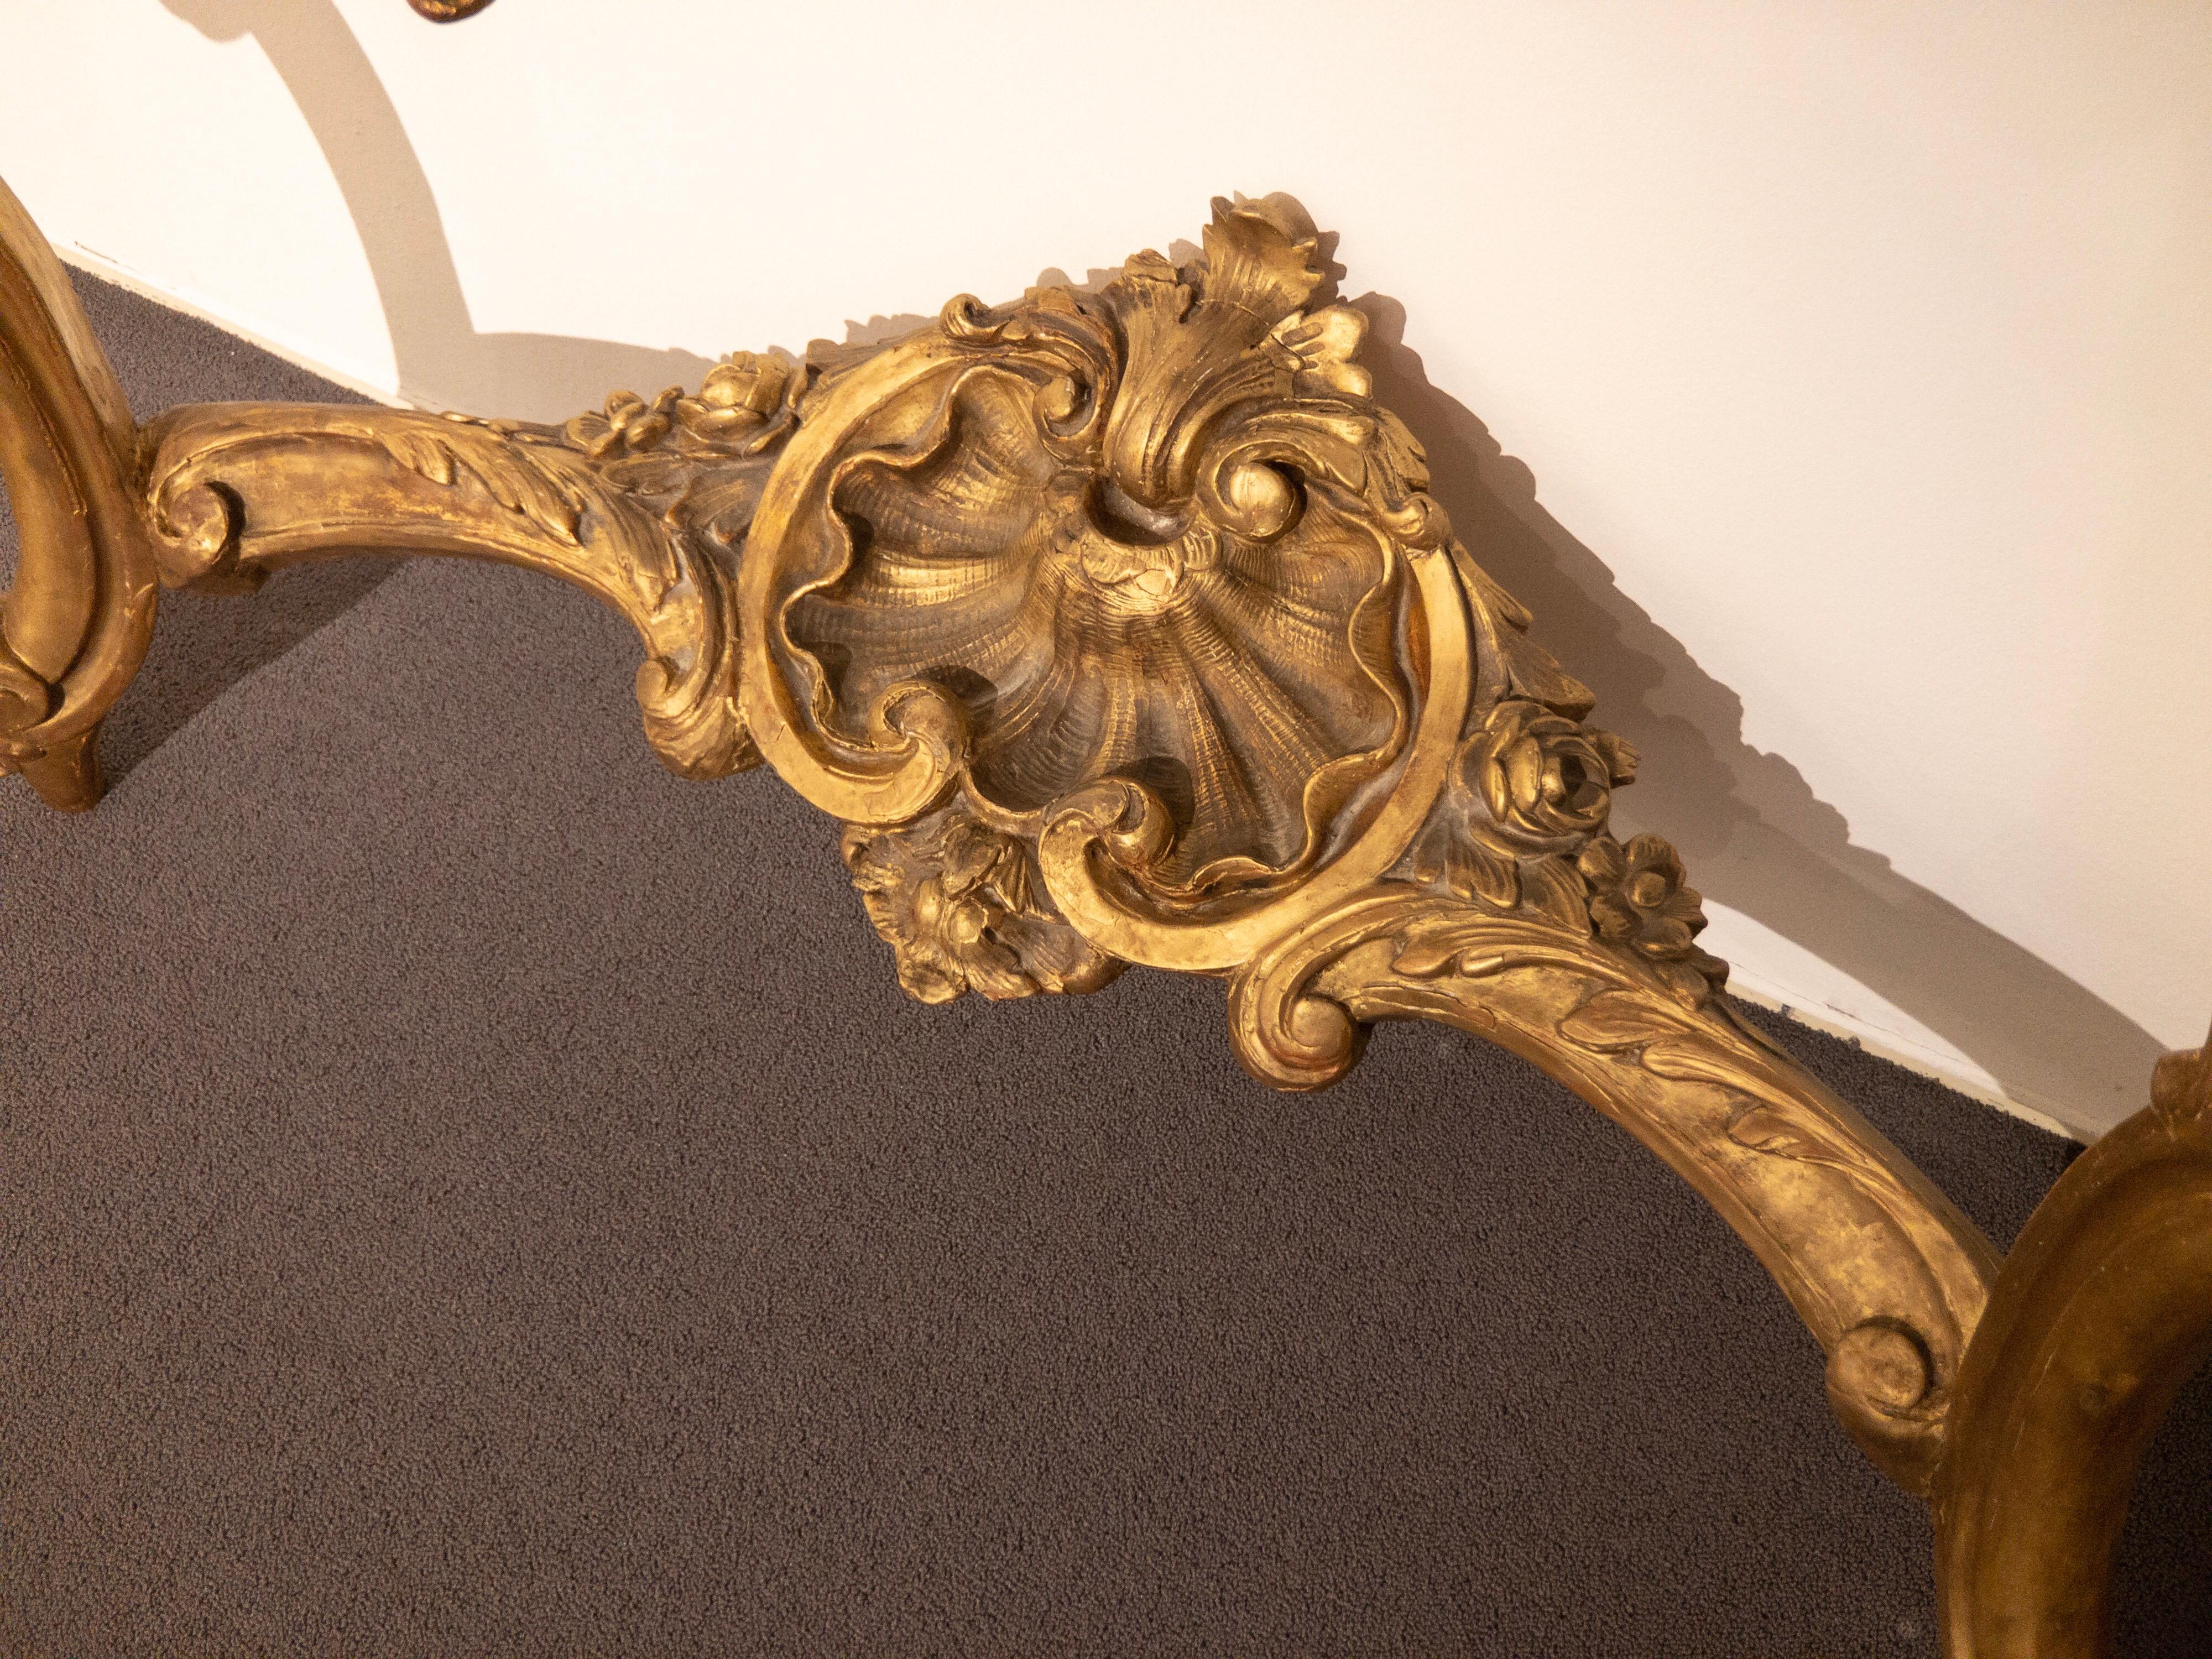 Antique Gilded Baroque Console Table with Carrara Marble-Top from France For Sale 7